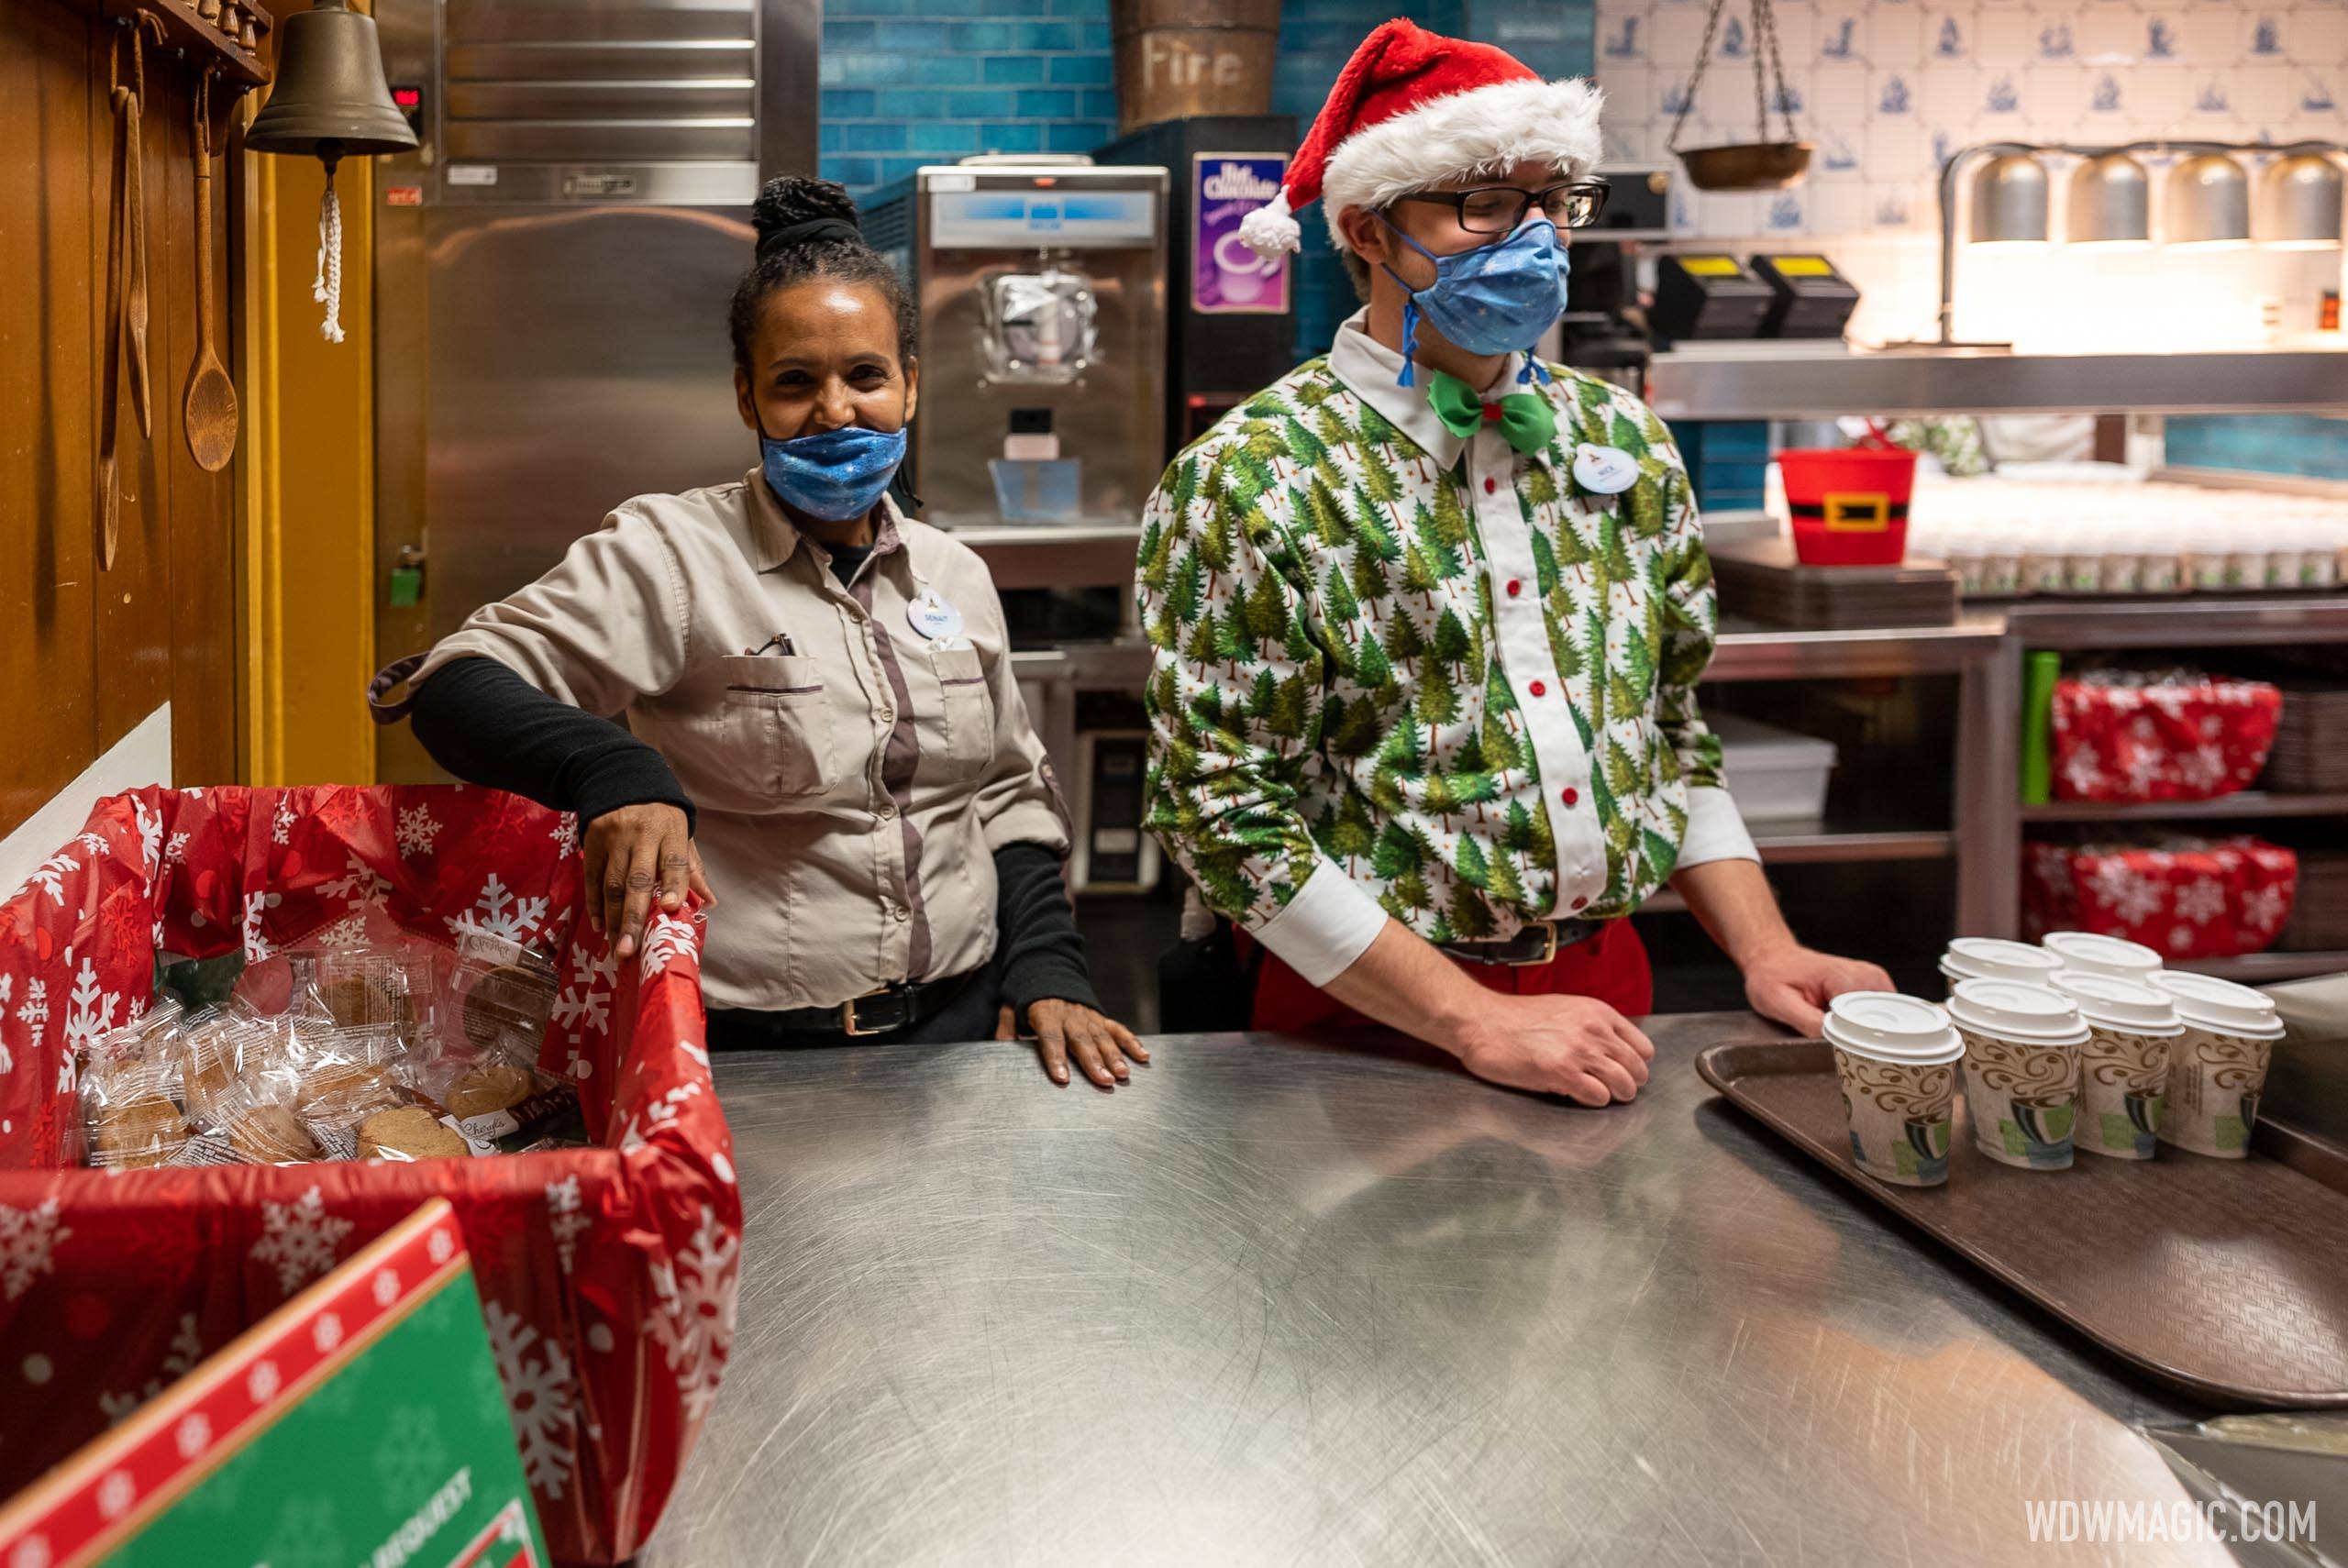 Cookie and cocoa on offer at Disney Very Merriest After Hours